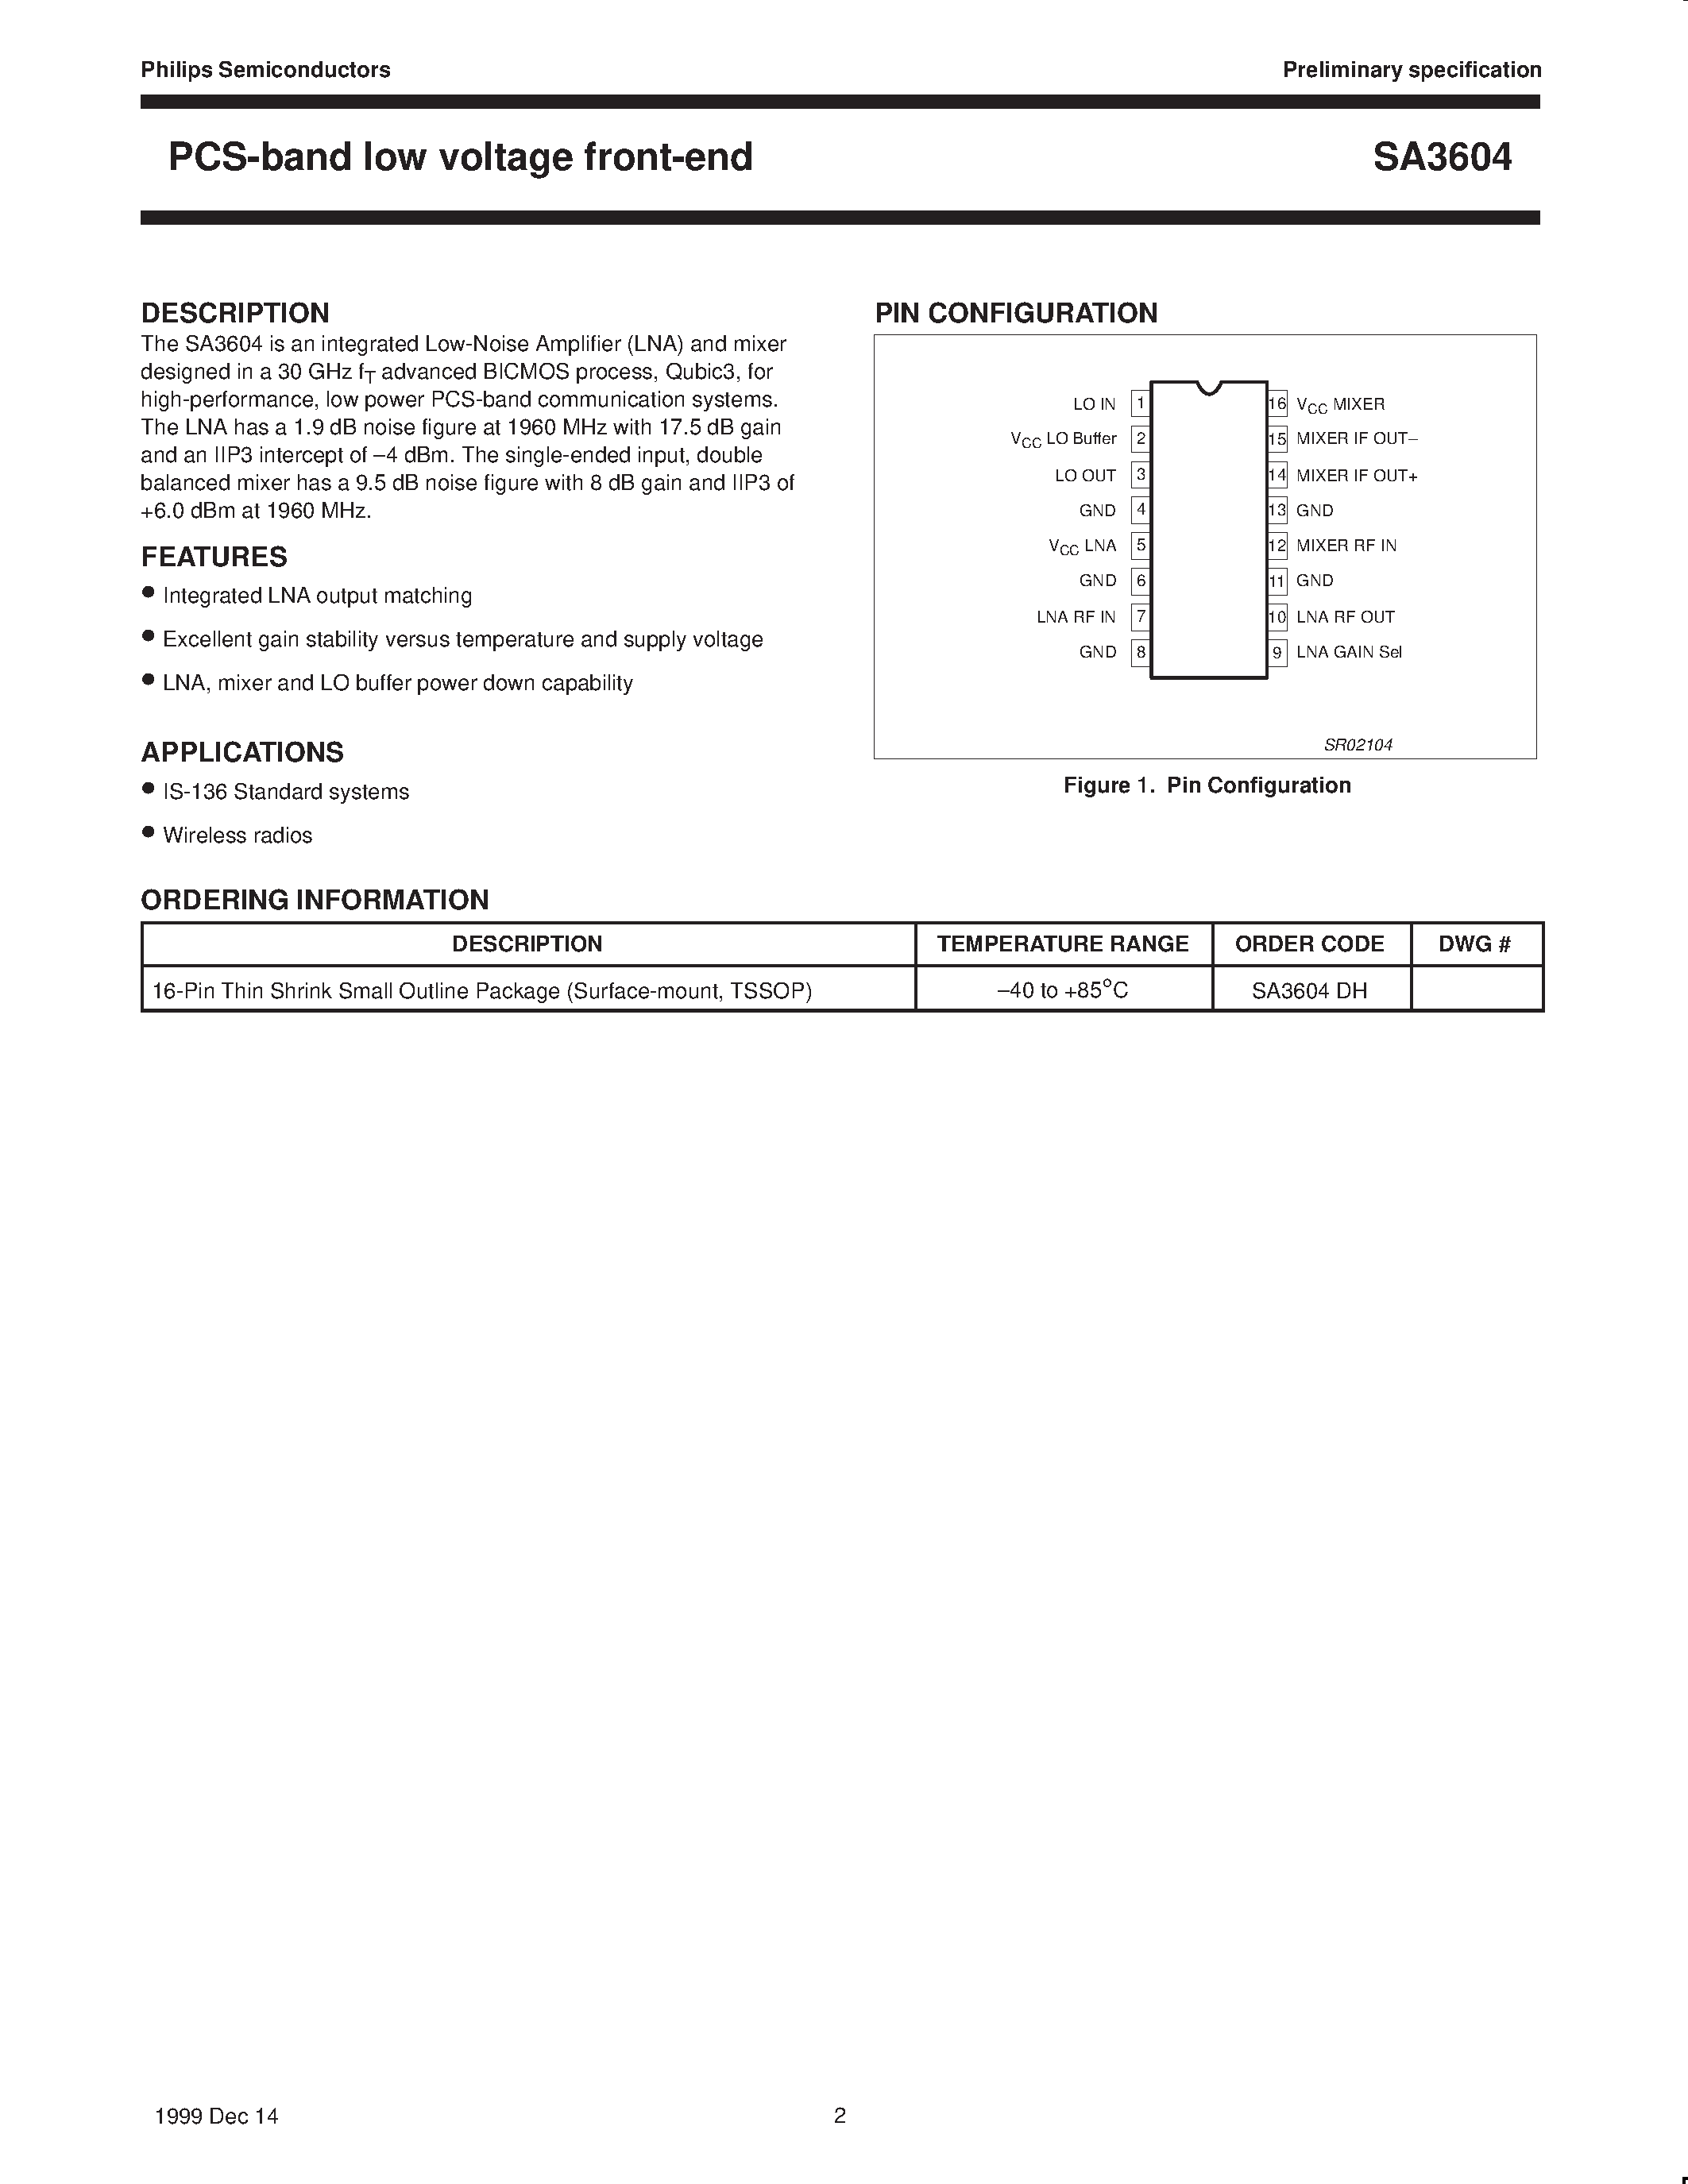 Datasheet SA3604DH - PCS-band low voltage front-end page 2